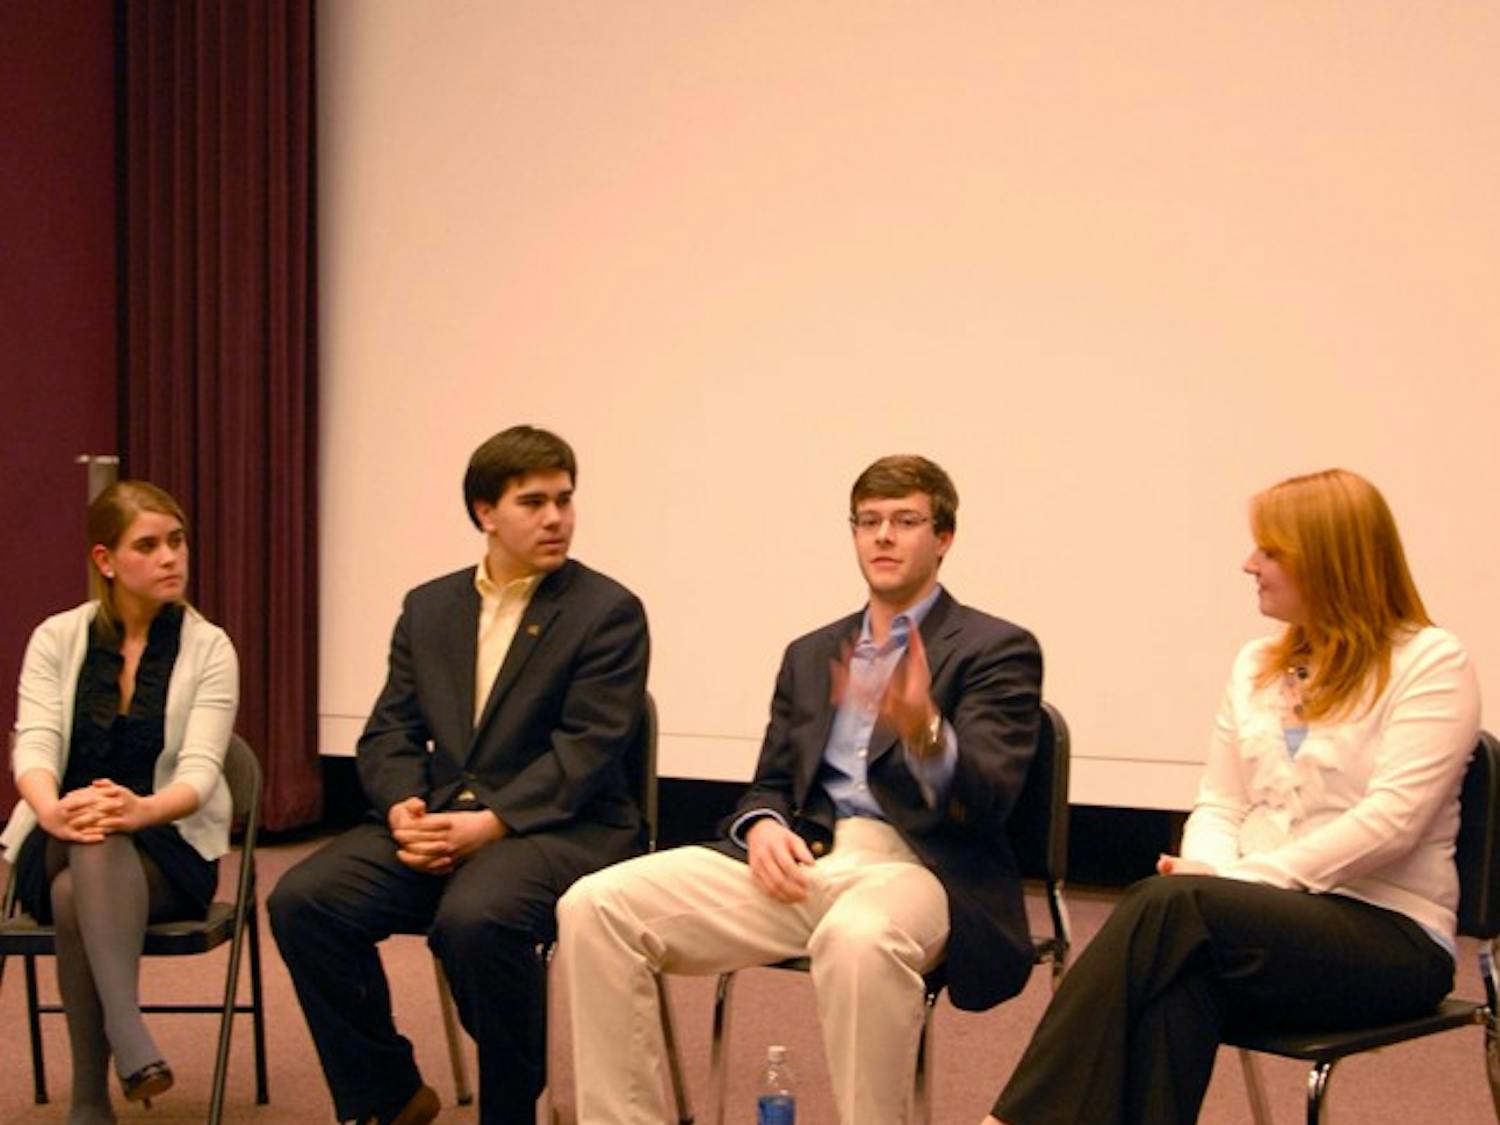 Mary Cooper, Ian Lee, Rick Ingram and Brooklyn Stephens voice their goals and opinions at the College of Republicans meeting that took place at 6 pm in the Haynes Art Center.